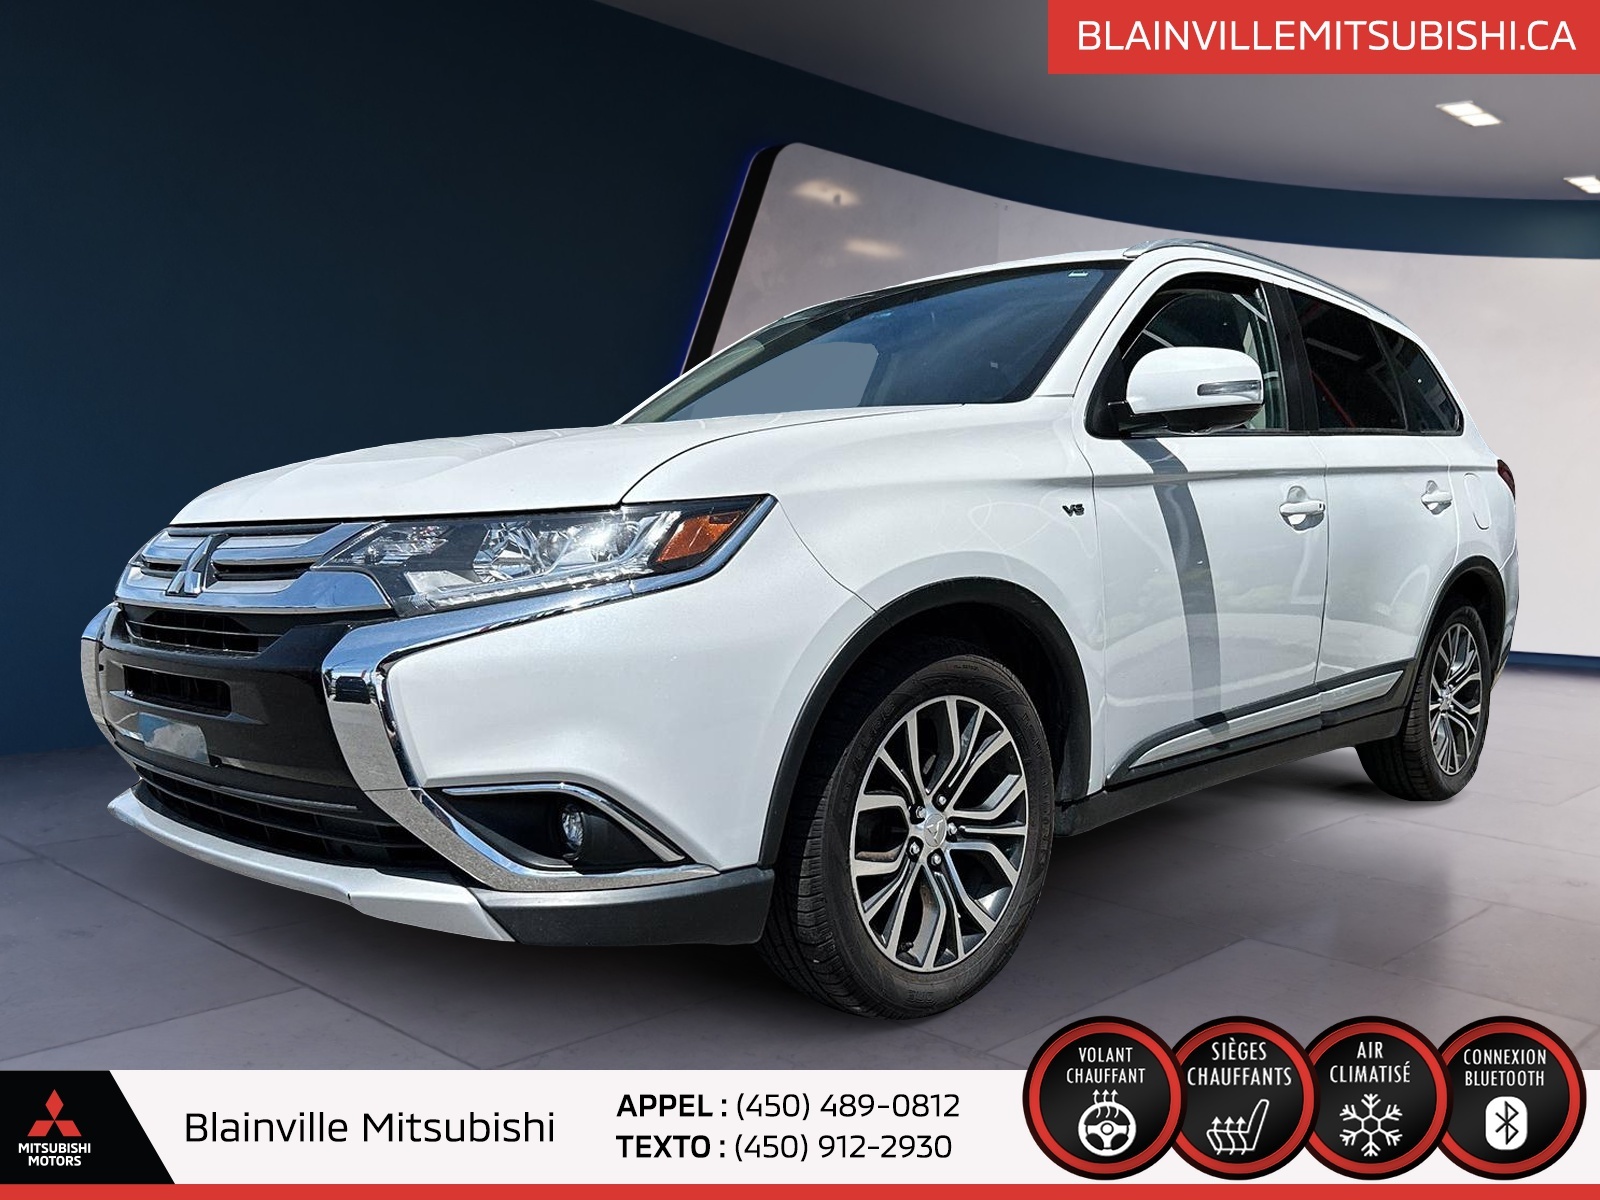 2017 Mitsubishi Outlander GT S-AWC + SYST. SOND 710W + CUIR + 7 PASS.